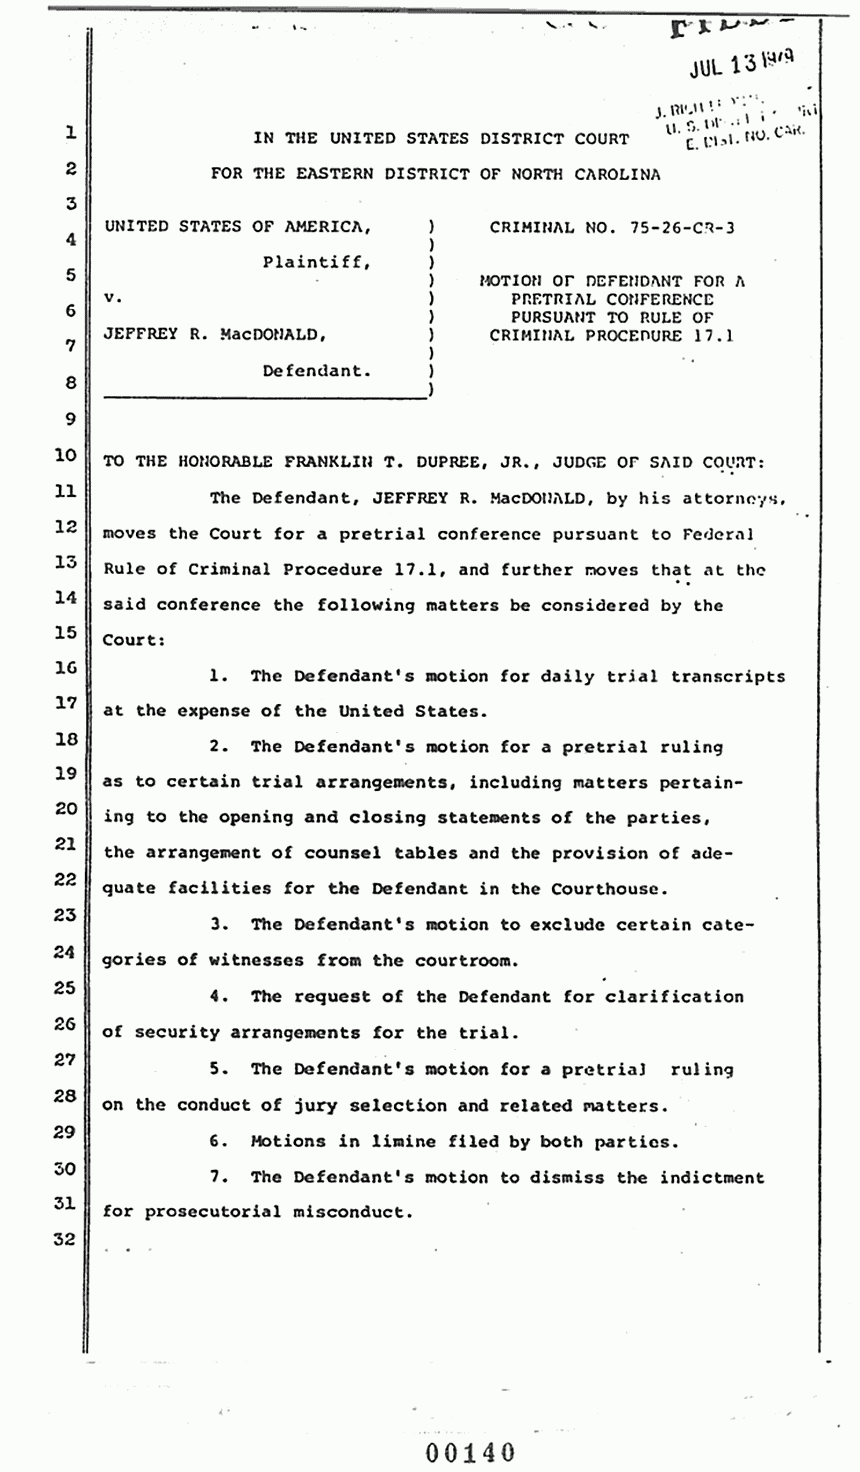 June 13, 1979: United States District Court, Eastern District of North Carolina; Motion of Jeffrey MacDonald for Pretrial Conference Pursuant to Rule of Criminal Procedure 17.1, p. 1 of 2